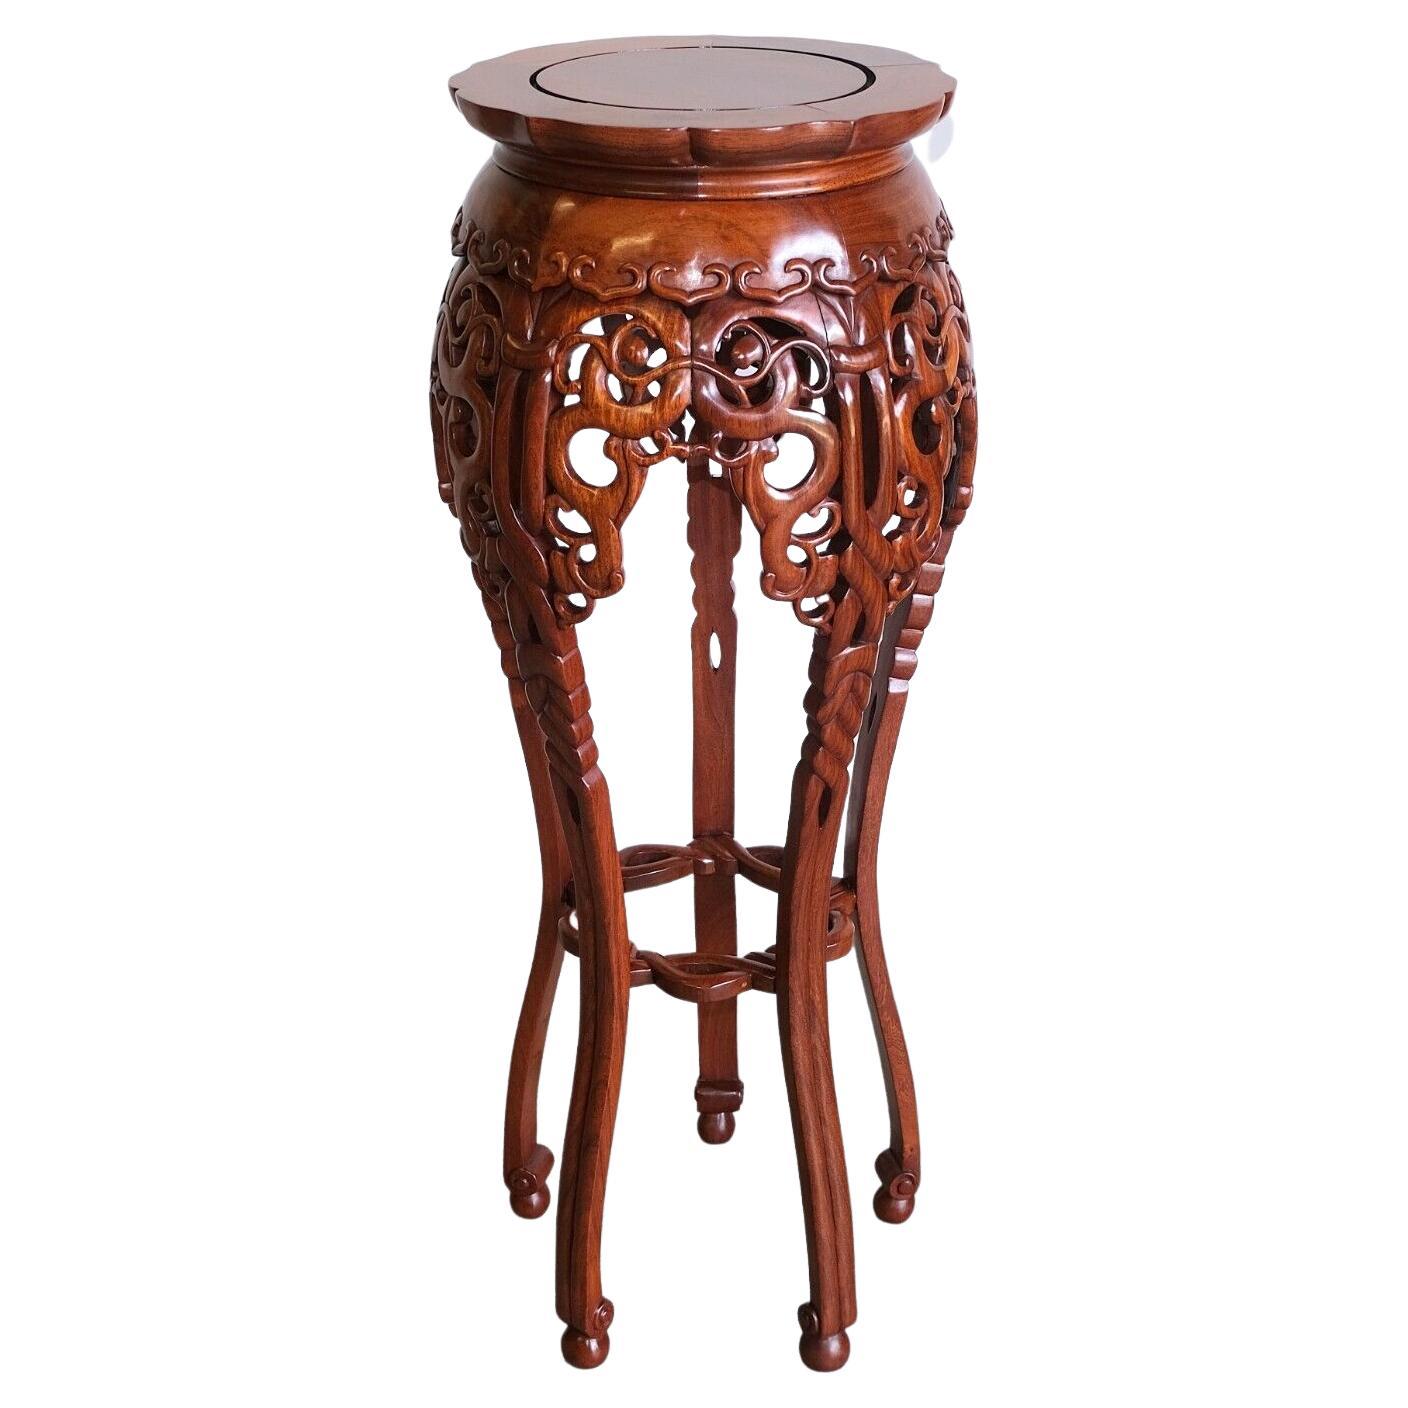 STUNNiNG HAND CARVED TEAK ROUND TOP PLANT STAND LEAVE TOP SHAPE & STUNNING LEGS For Sale